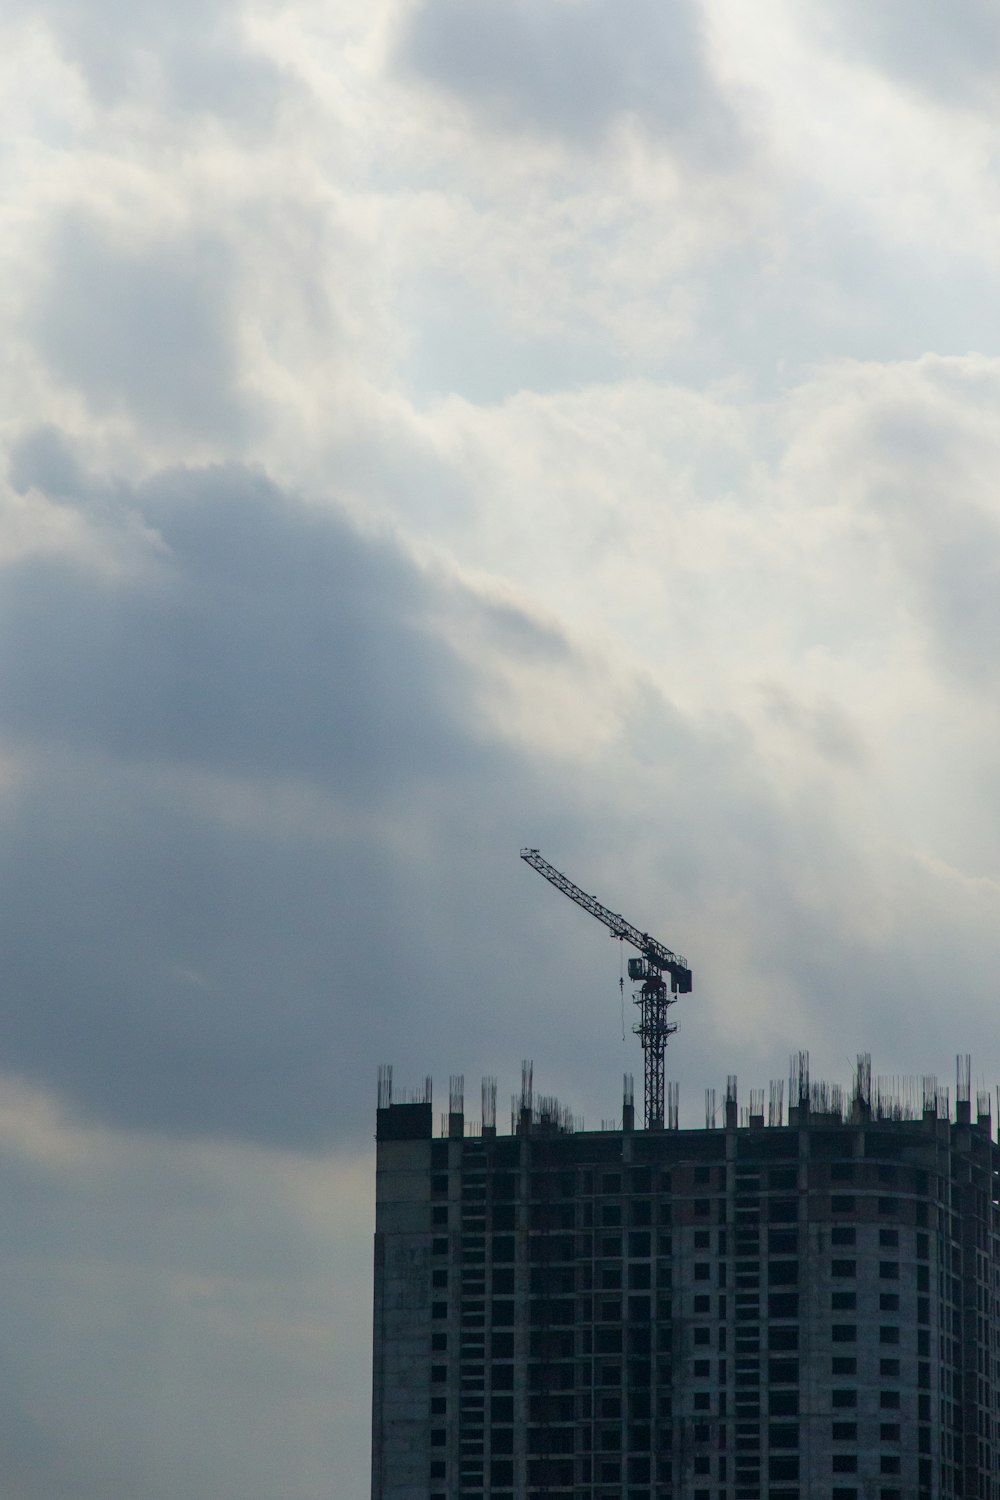 a crane on top of a tall building under a cloudy sky